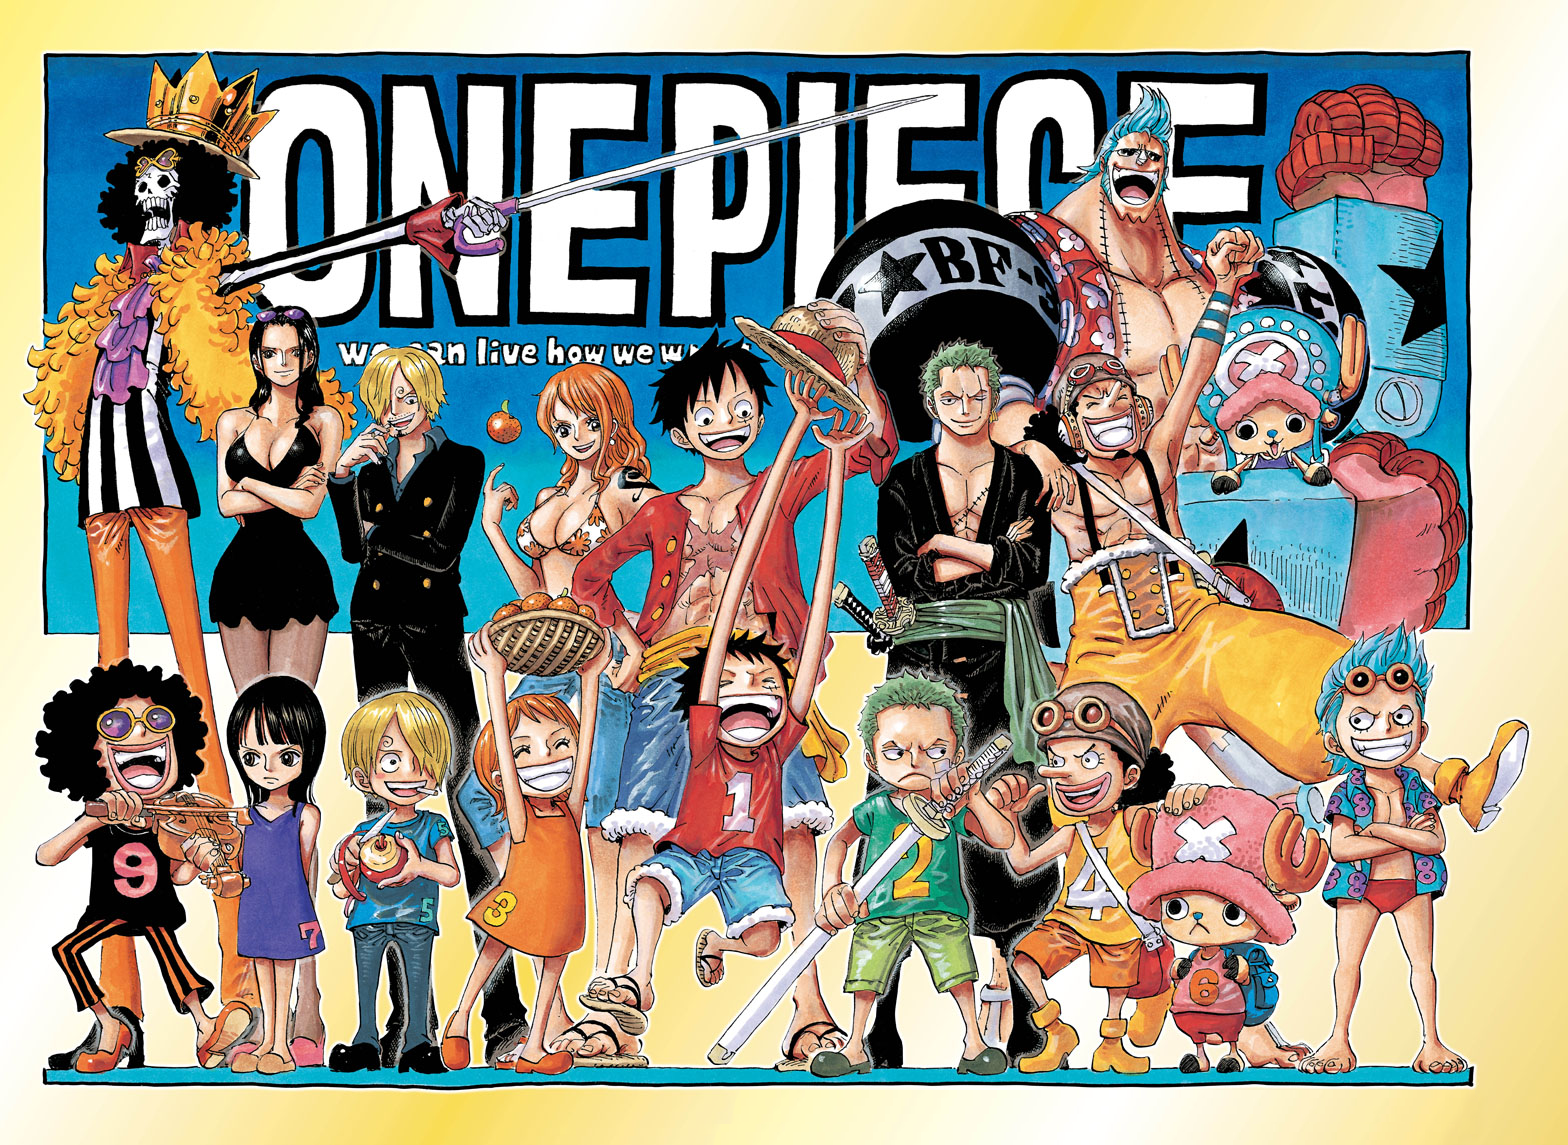 https://static.wikia.nocookie.net/onepiece/images/a/a0/Chapter_726.png/revision/latest?cb=20131108113831